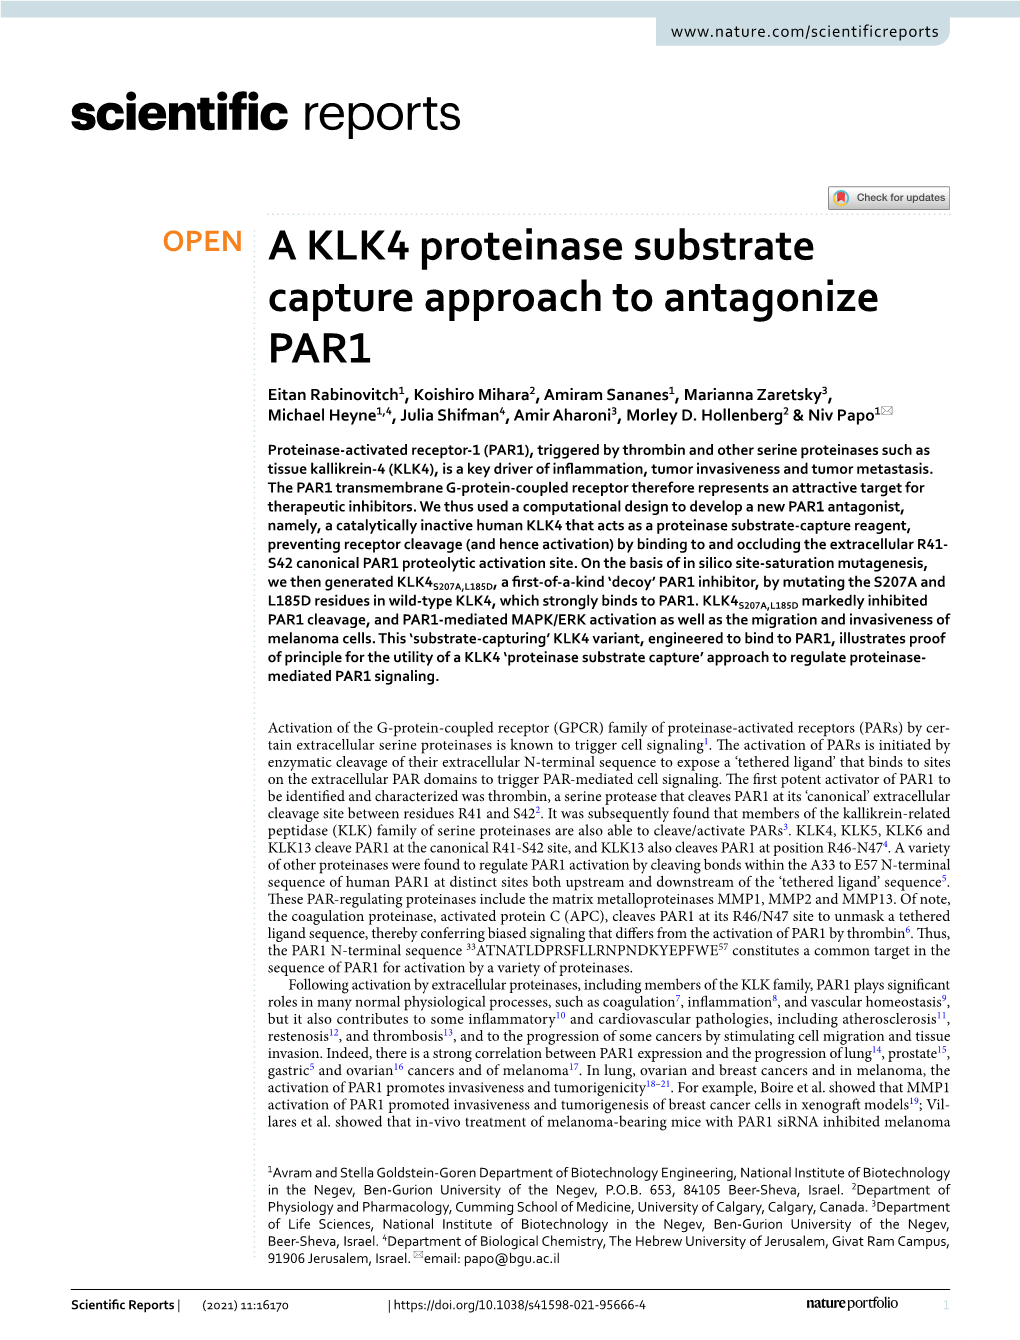 A KLK4 Proteinase Substrate Capture Approach to Antagonize PAR1